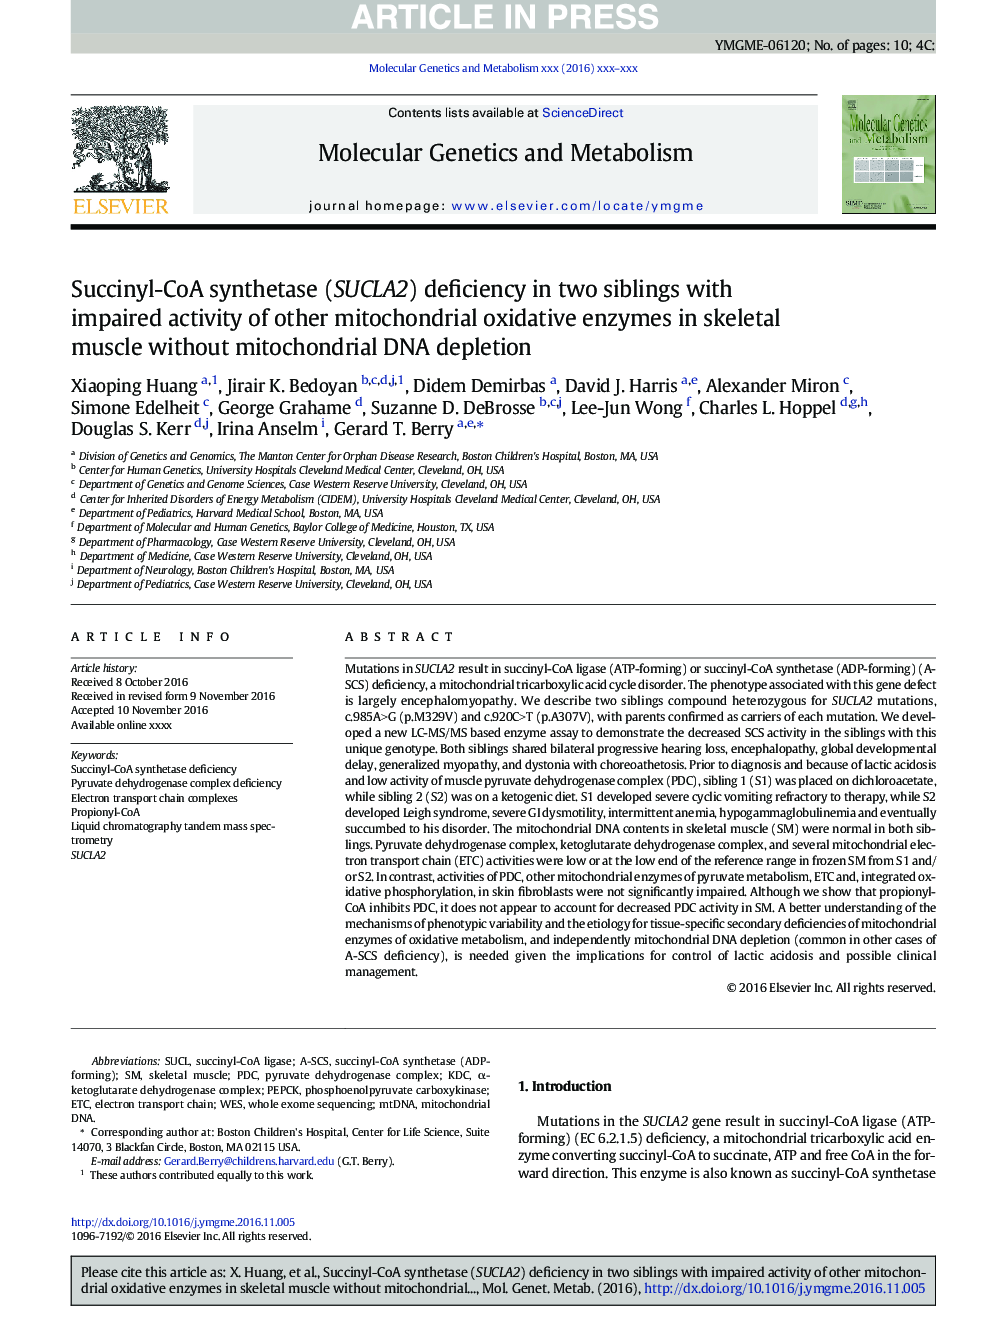 Succinyl-CoA synthetase (SUCLA2) deficiency in two siblings with impaired activity of other mitochondrial oxidative enzymes in skeletal muscle without mitochondrial DNA depletion